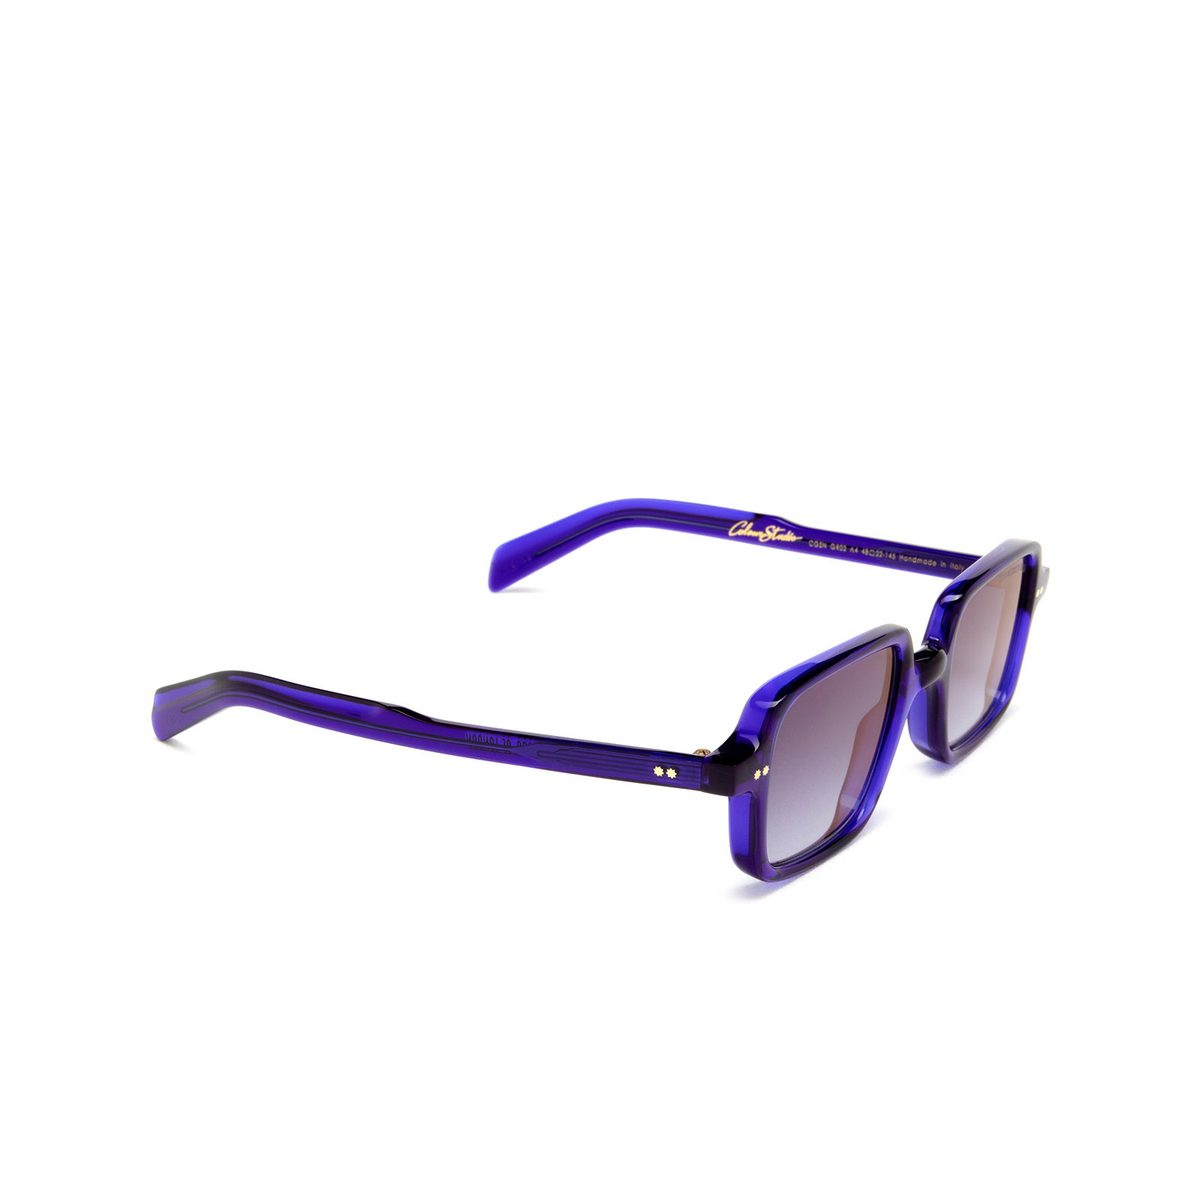 Cutler and Gross GR02 Sunglasses A4 Ink - three-quarters view